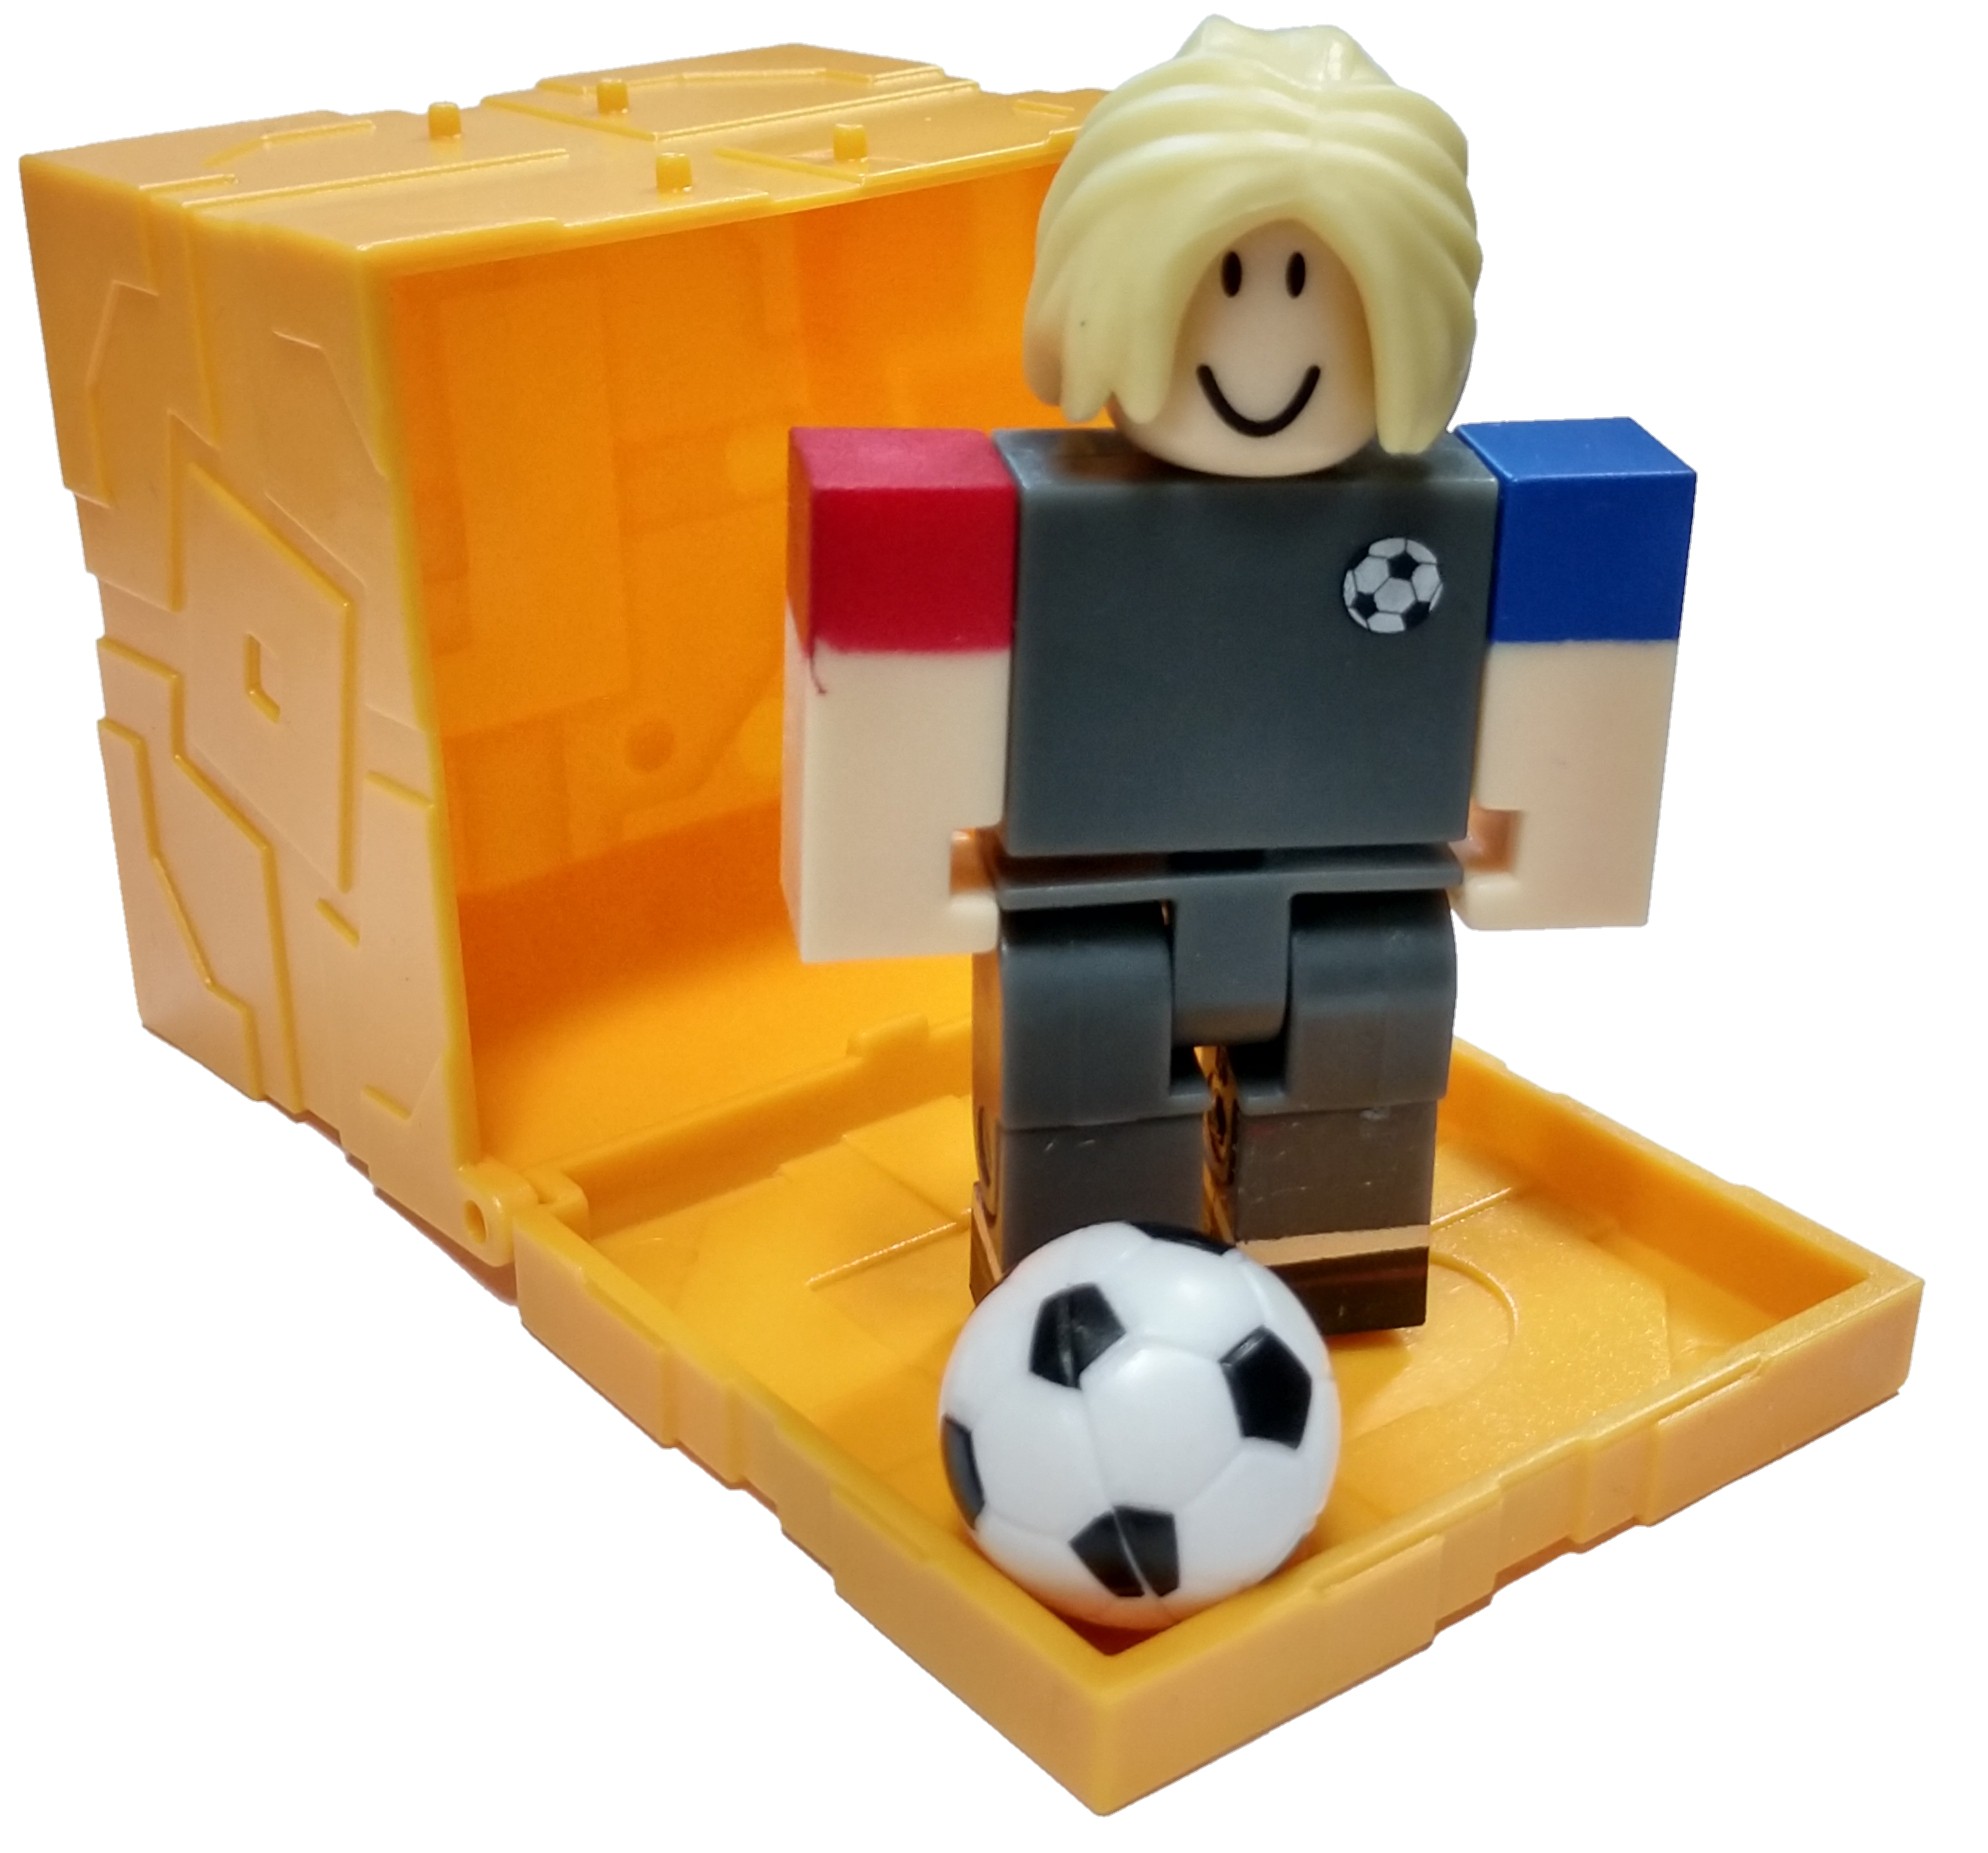 Roblox Series 5 Kick Off Goalkeep Mini Figure With Gold Cube And Online Code No Packaging Walmart Com Walmart Com - roblox kick off controls